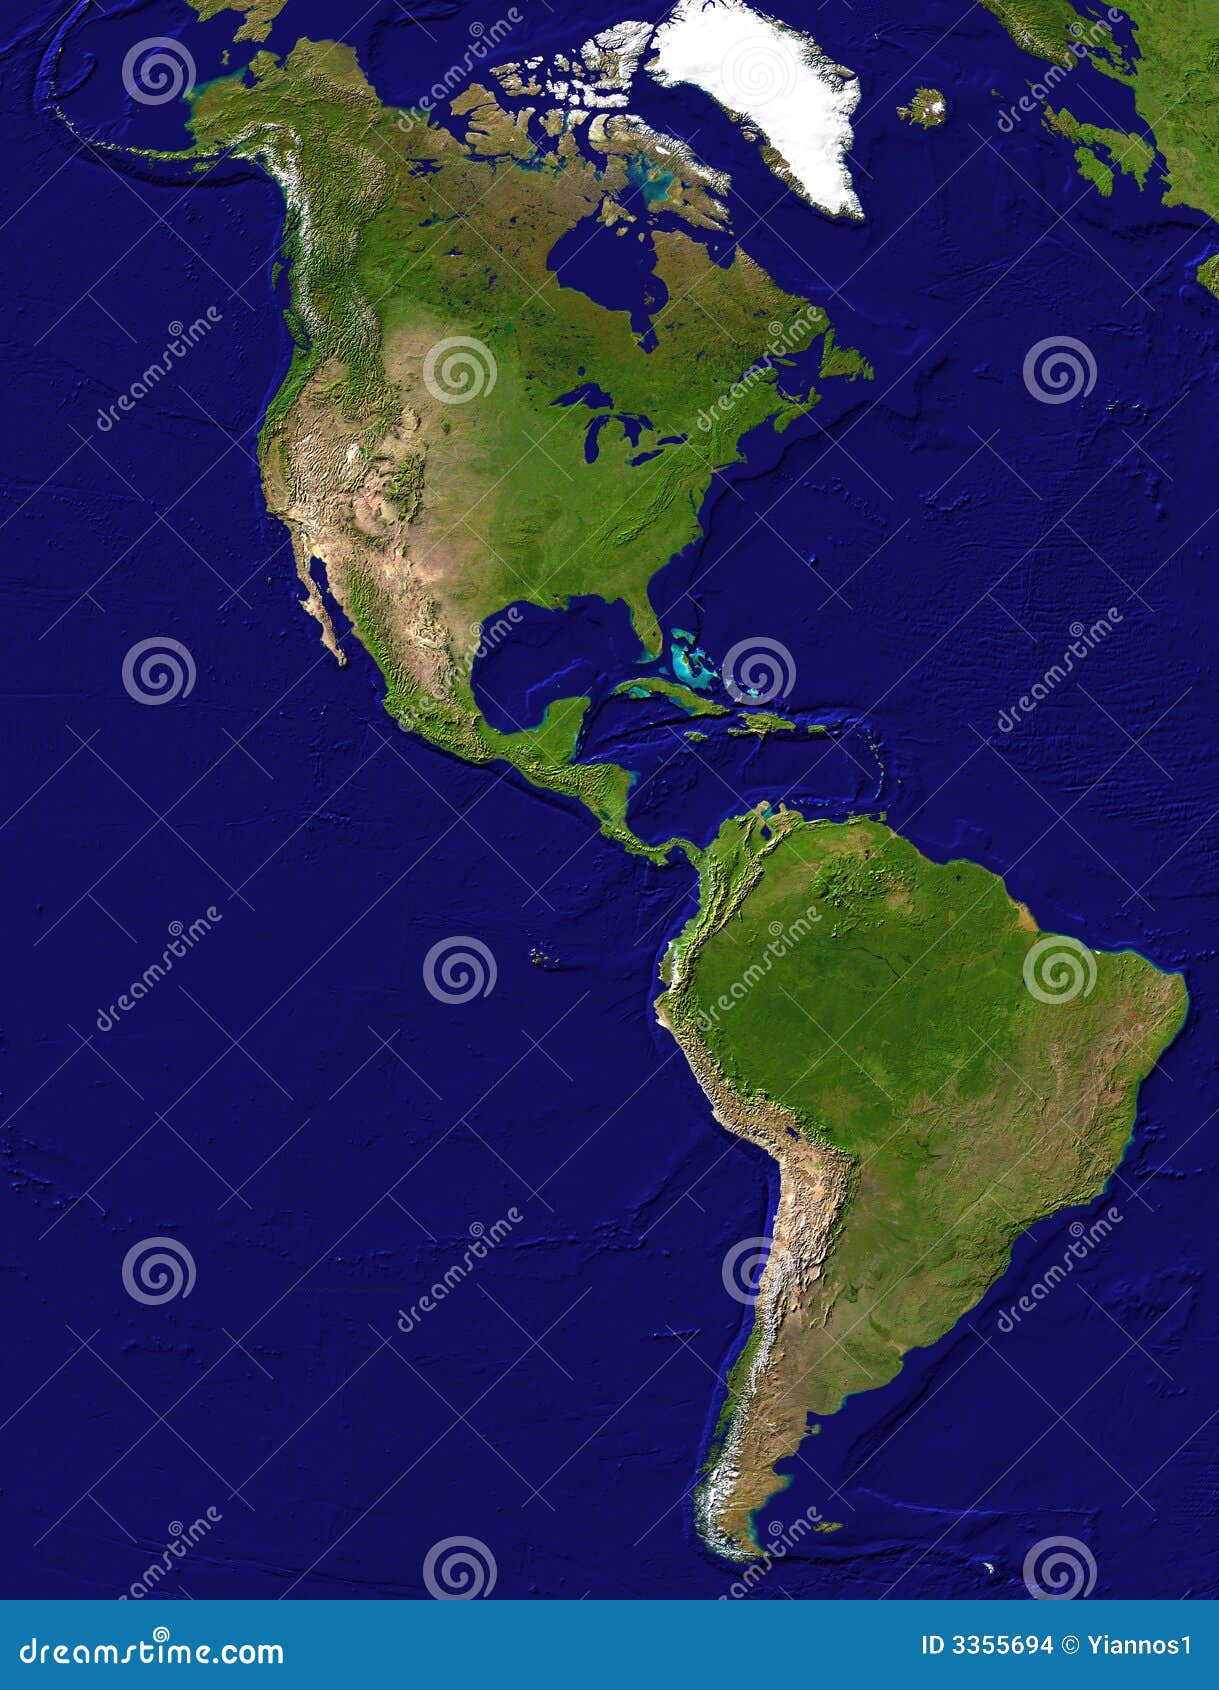 american continent view